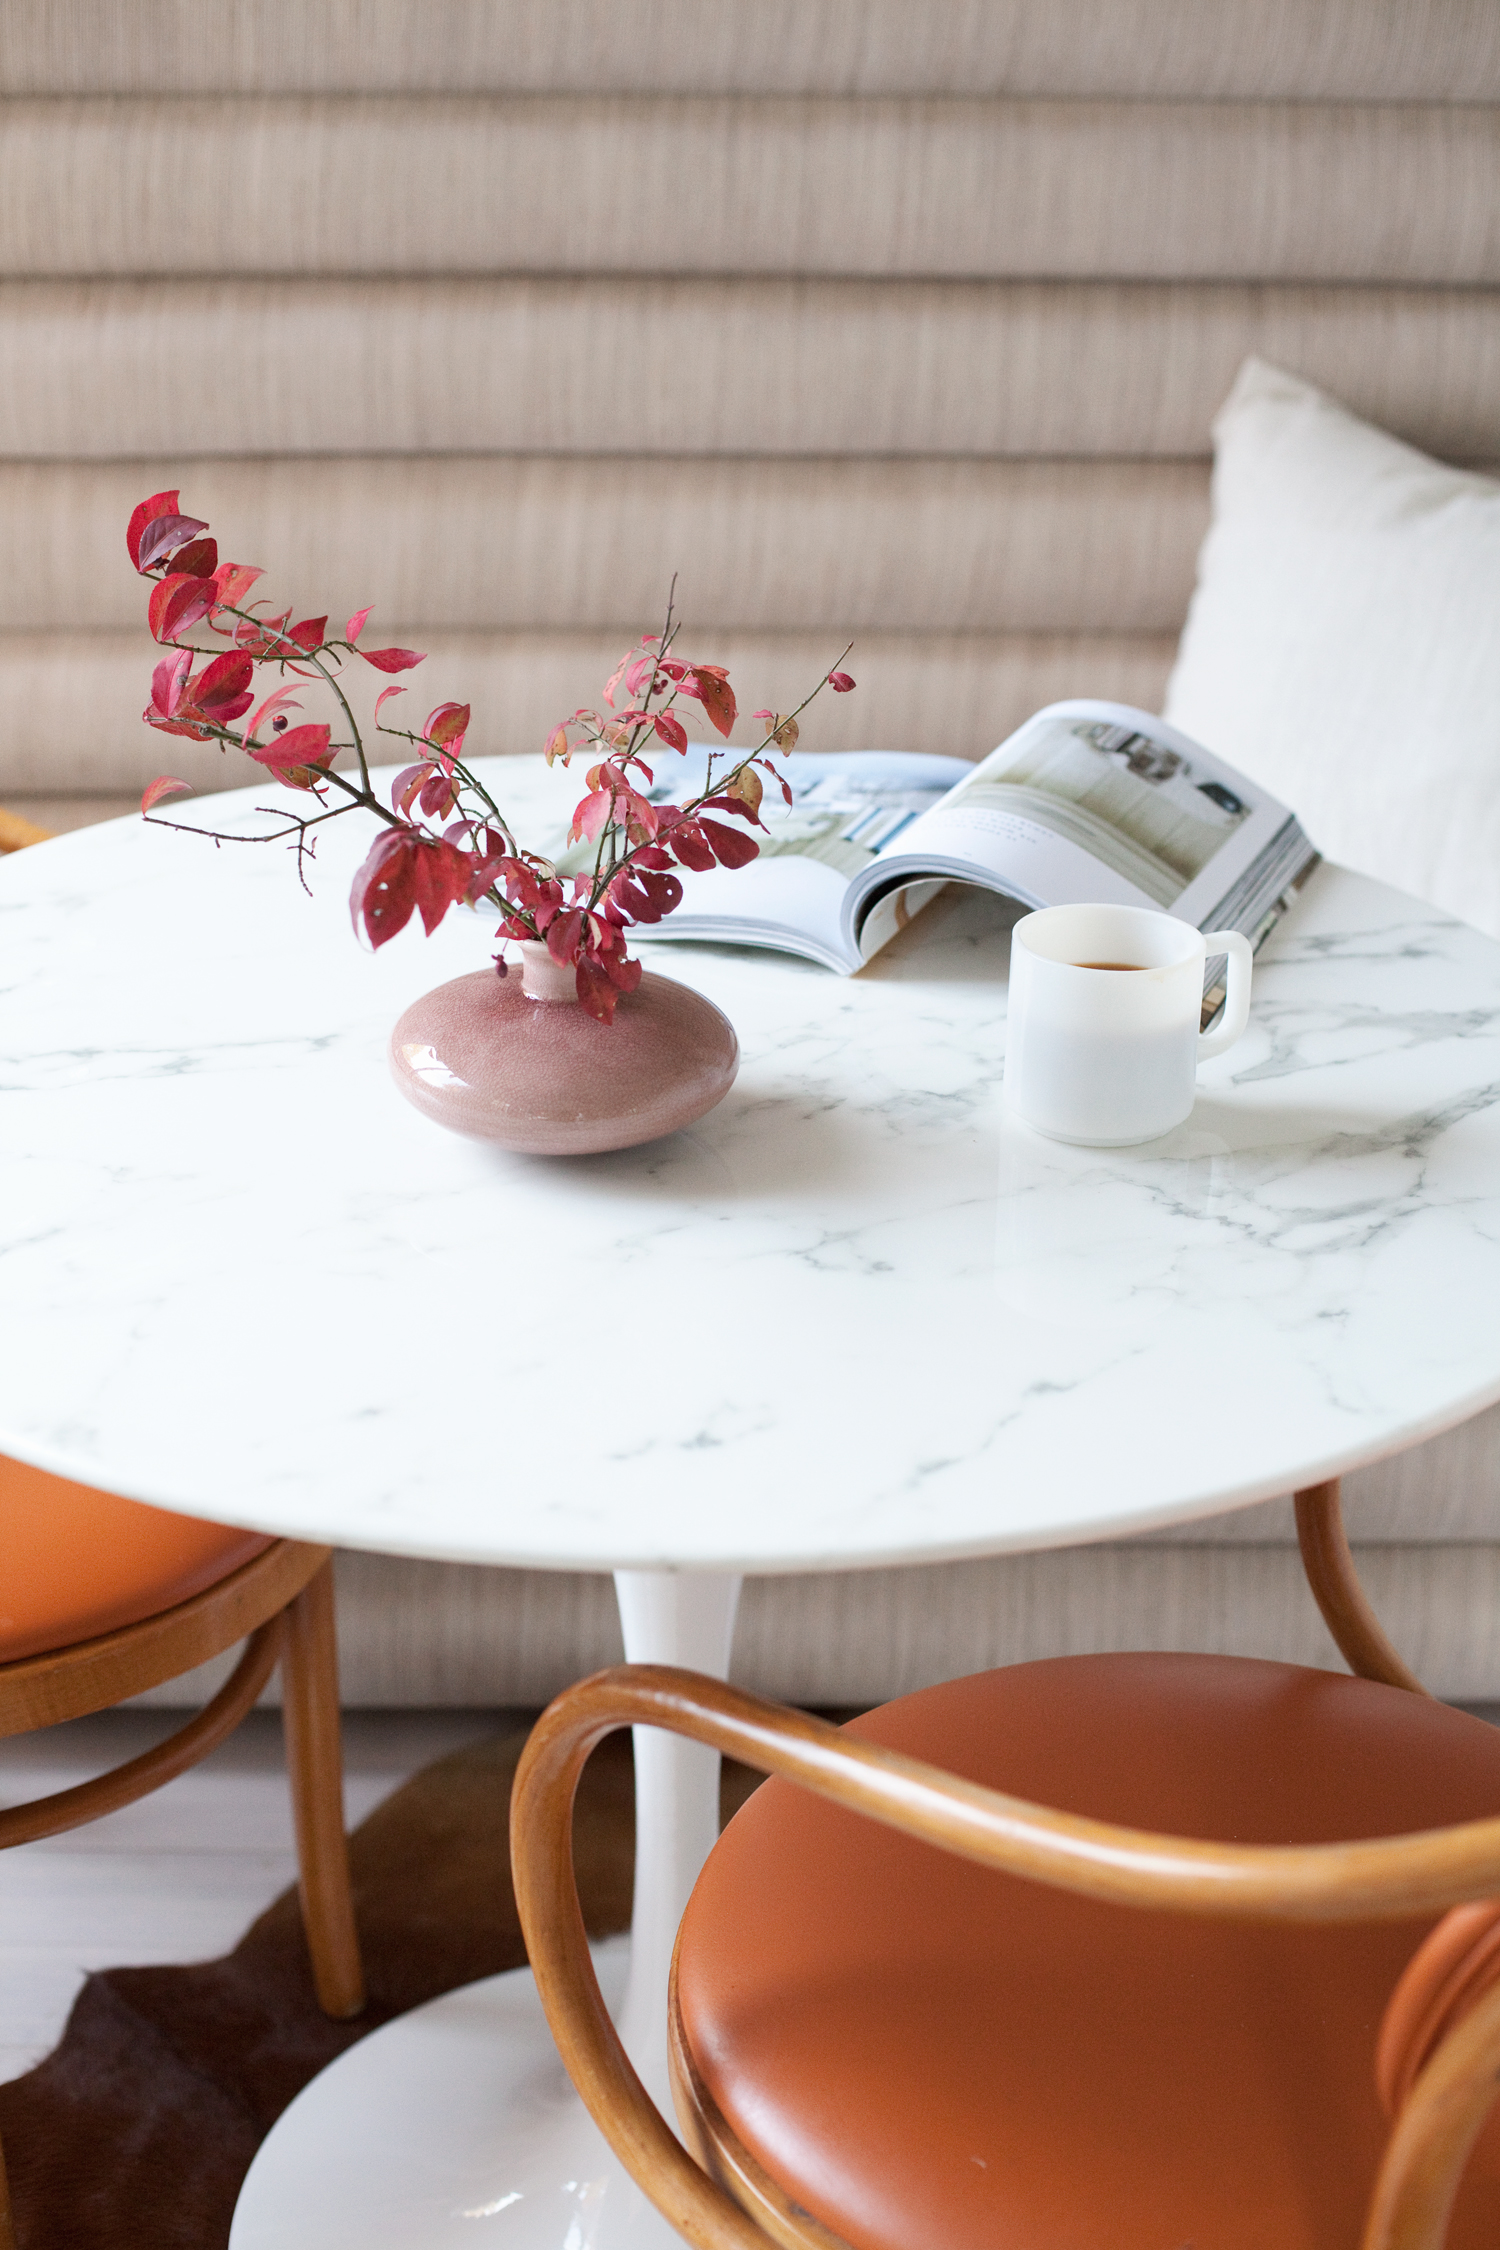 marble top tulip table